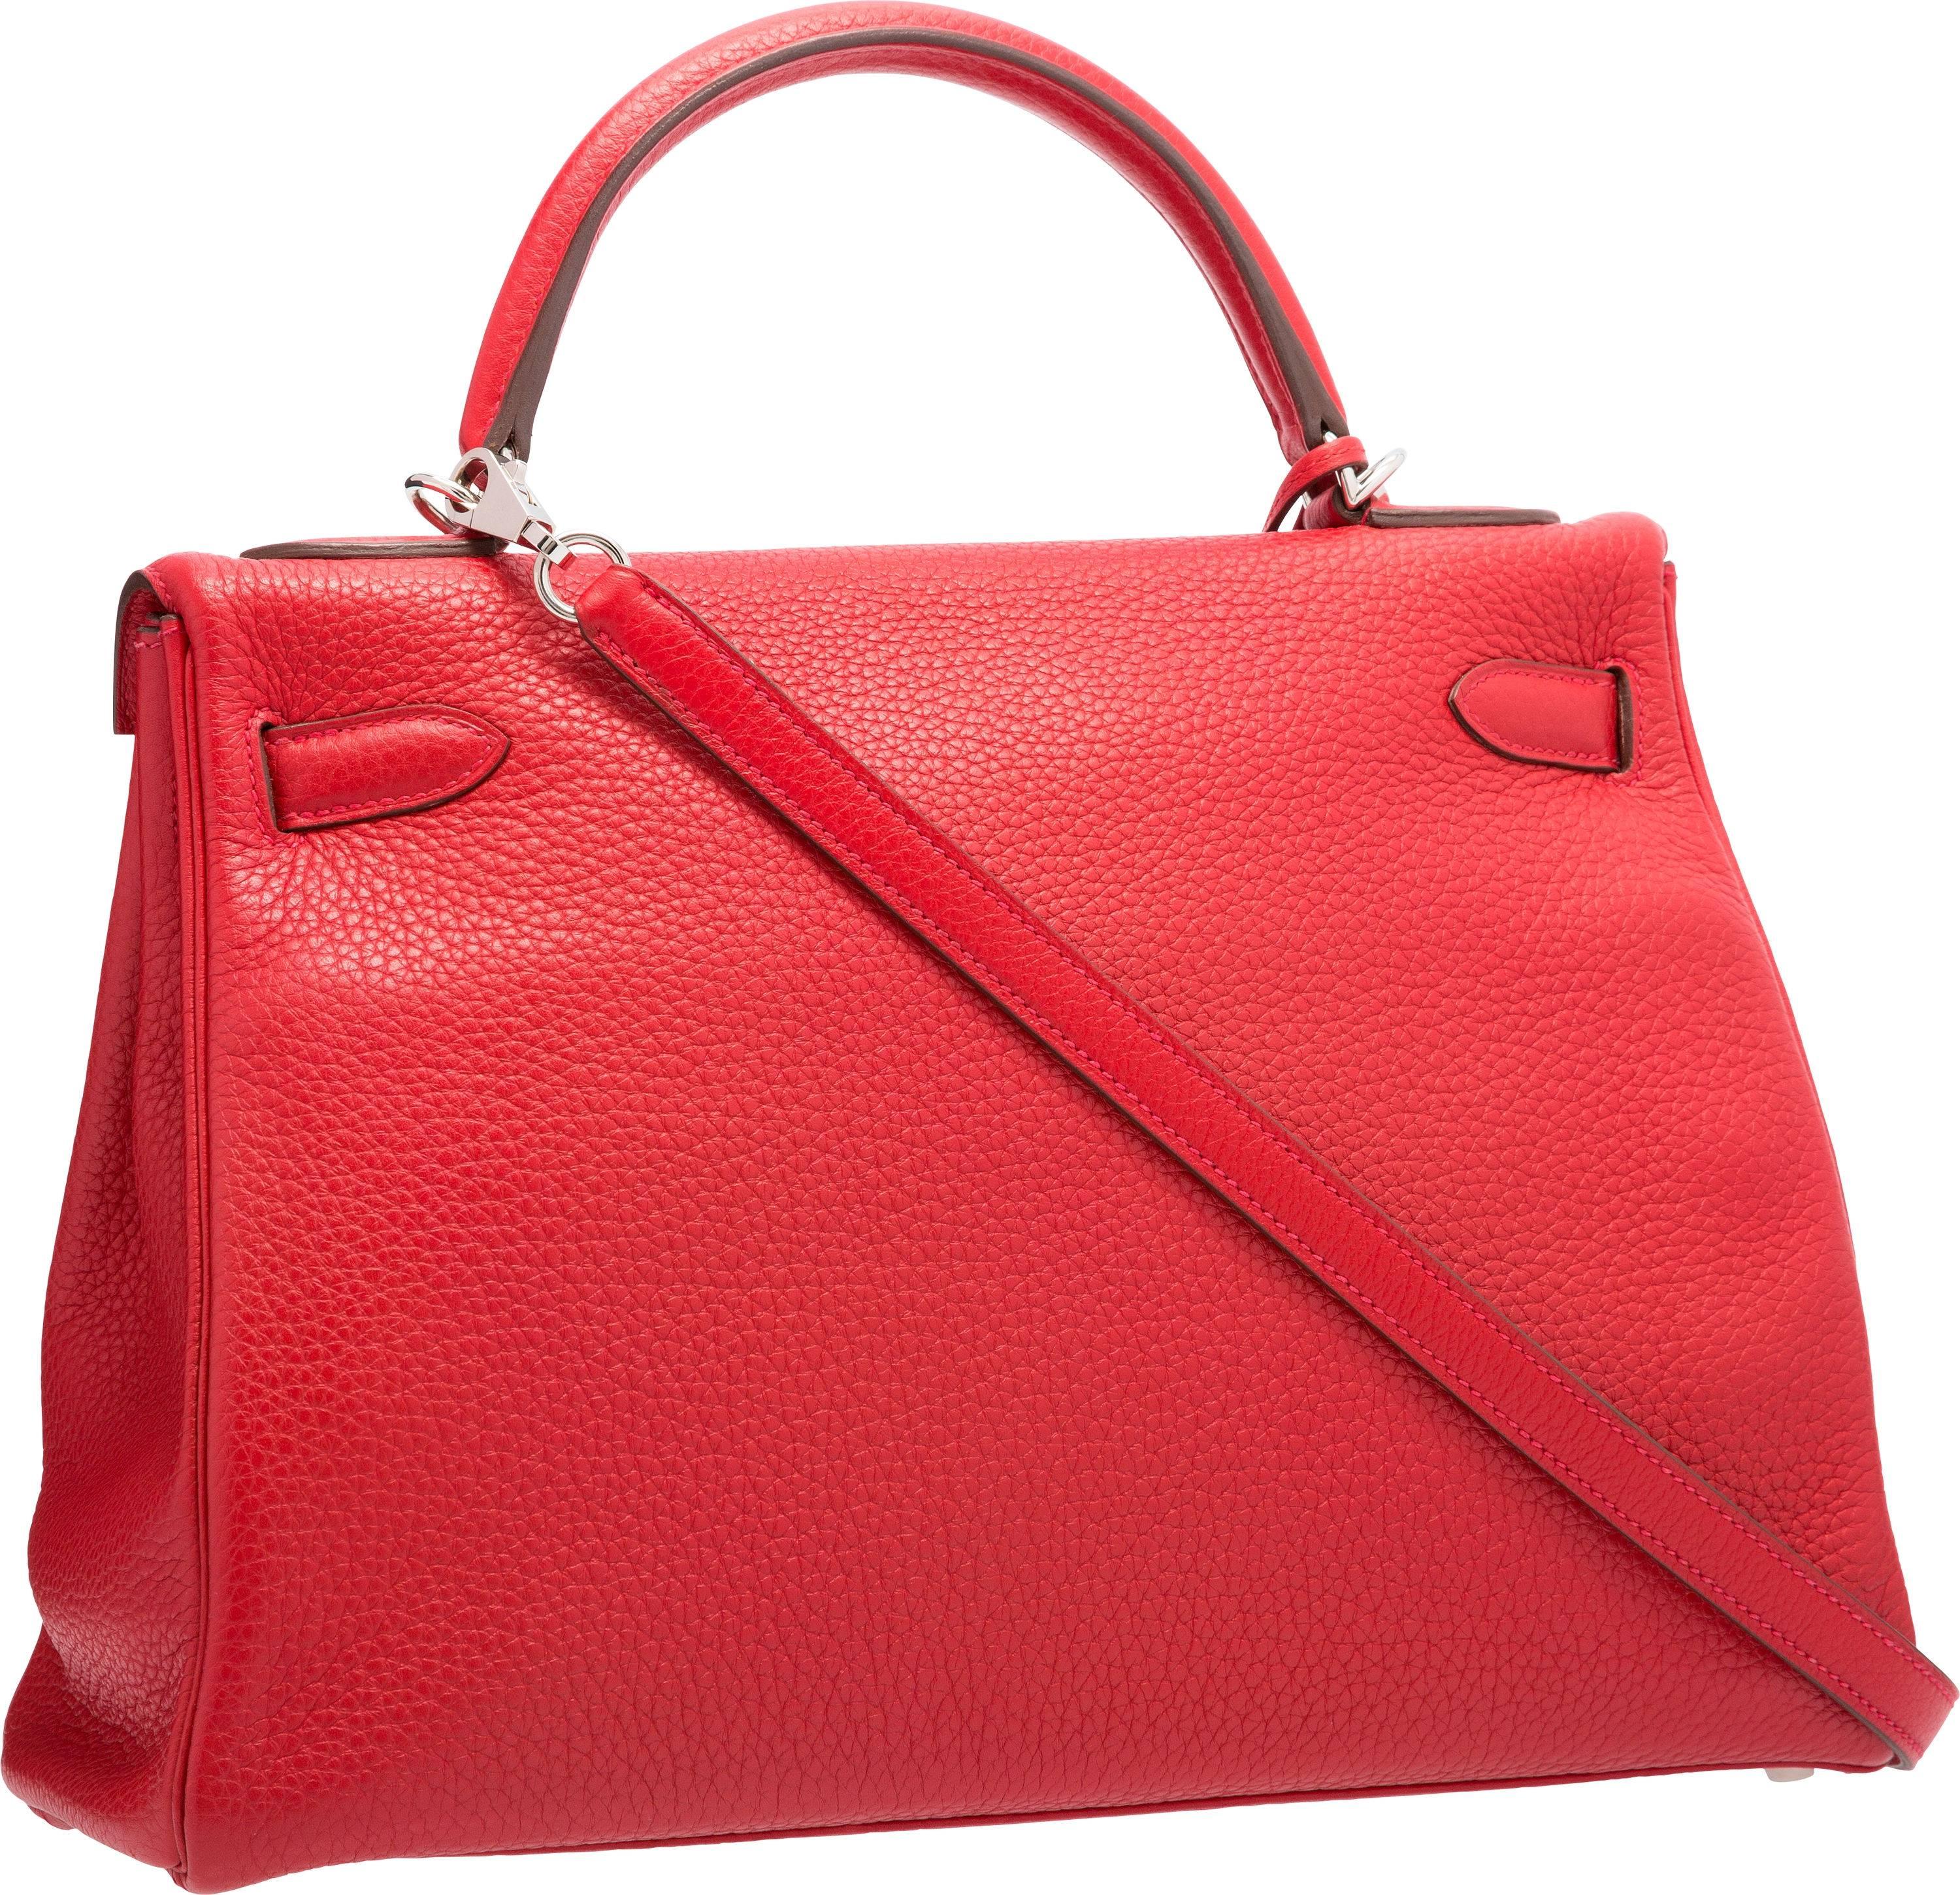 Hermes 32cm Rouge Vif Clemence Leather Retourne Kelly Bag In Excellent Condition For Sale In New York, NY